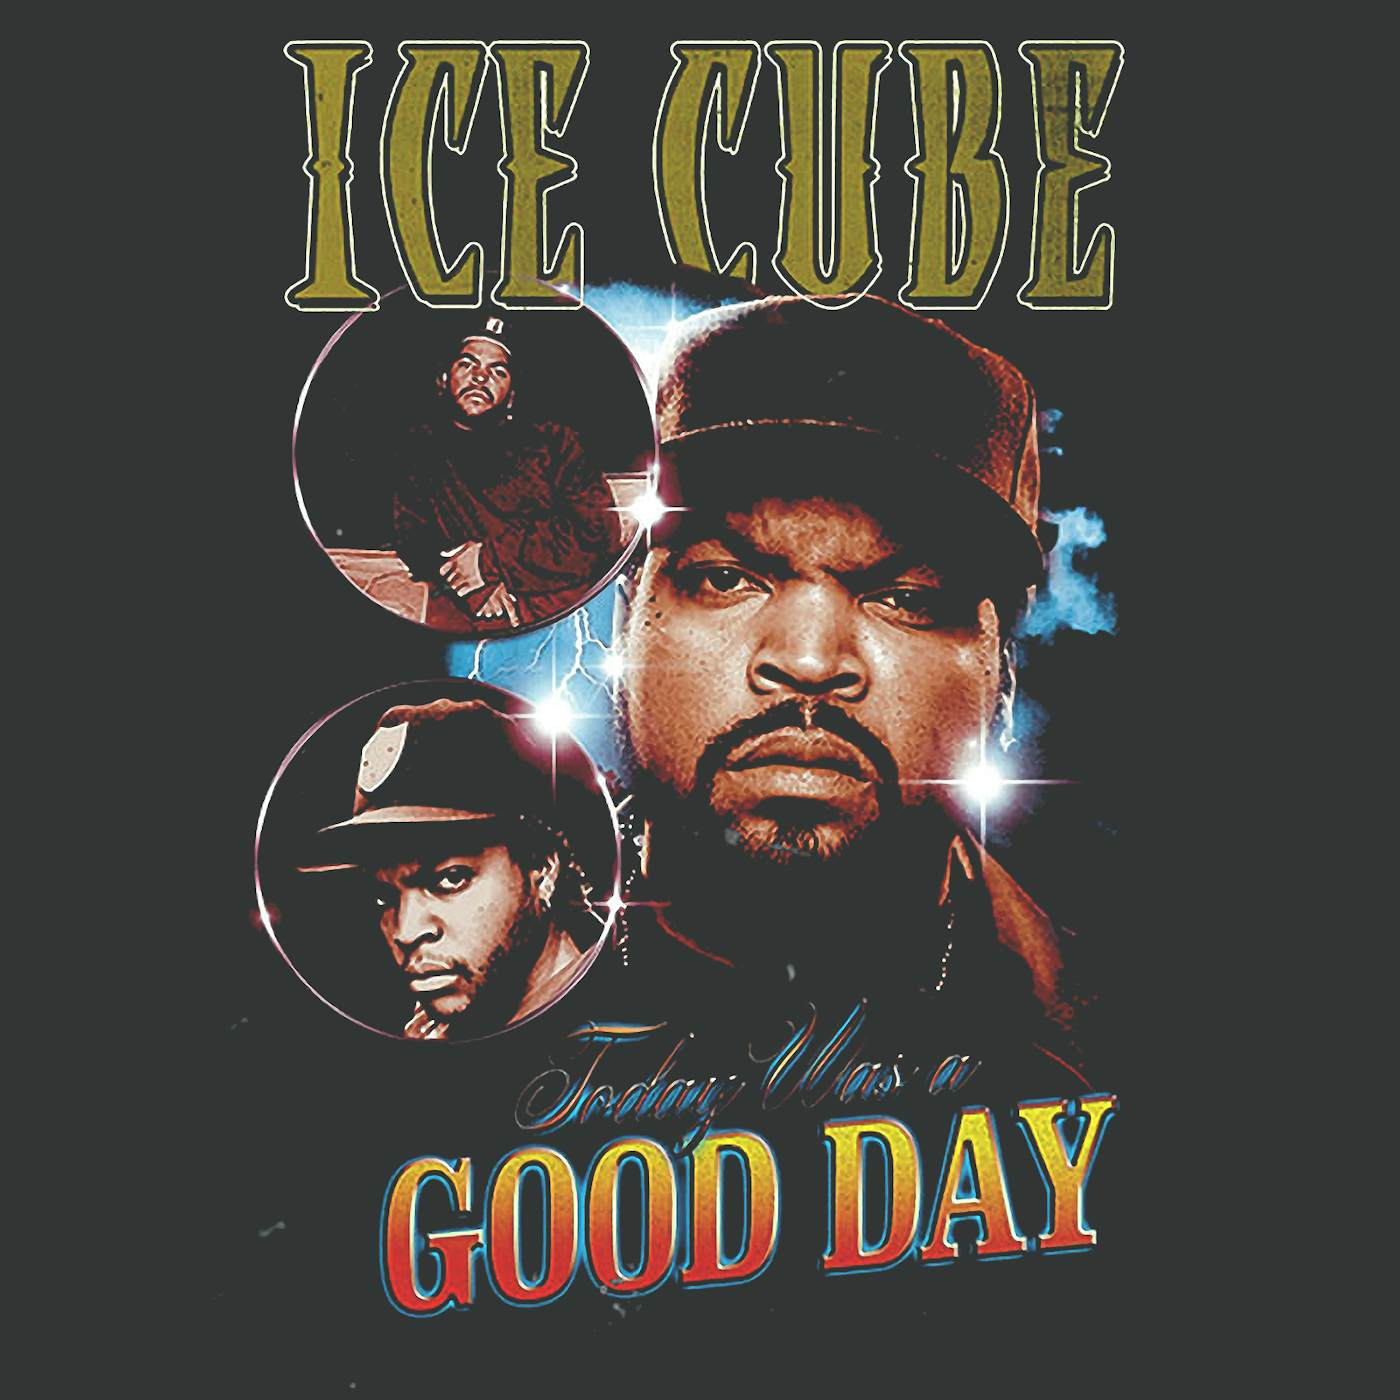 Ice Cube T-Shirt | Today Was A Good Day Photo Collage Ice Cube Shirt